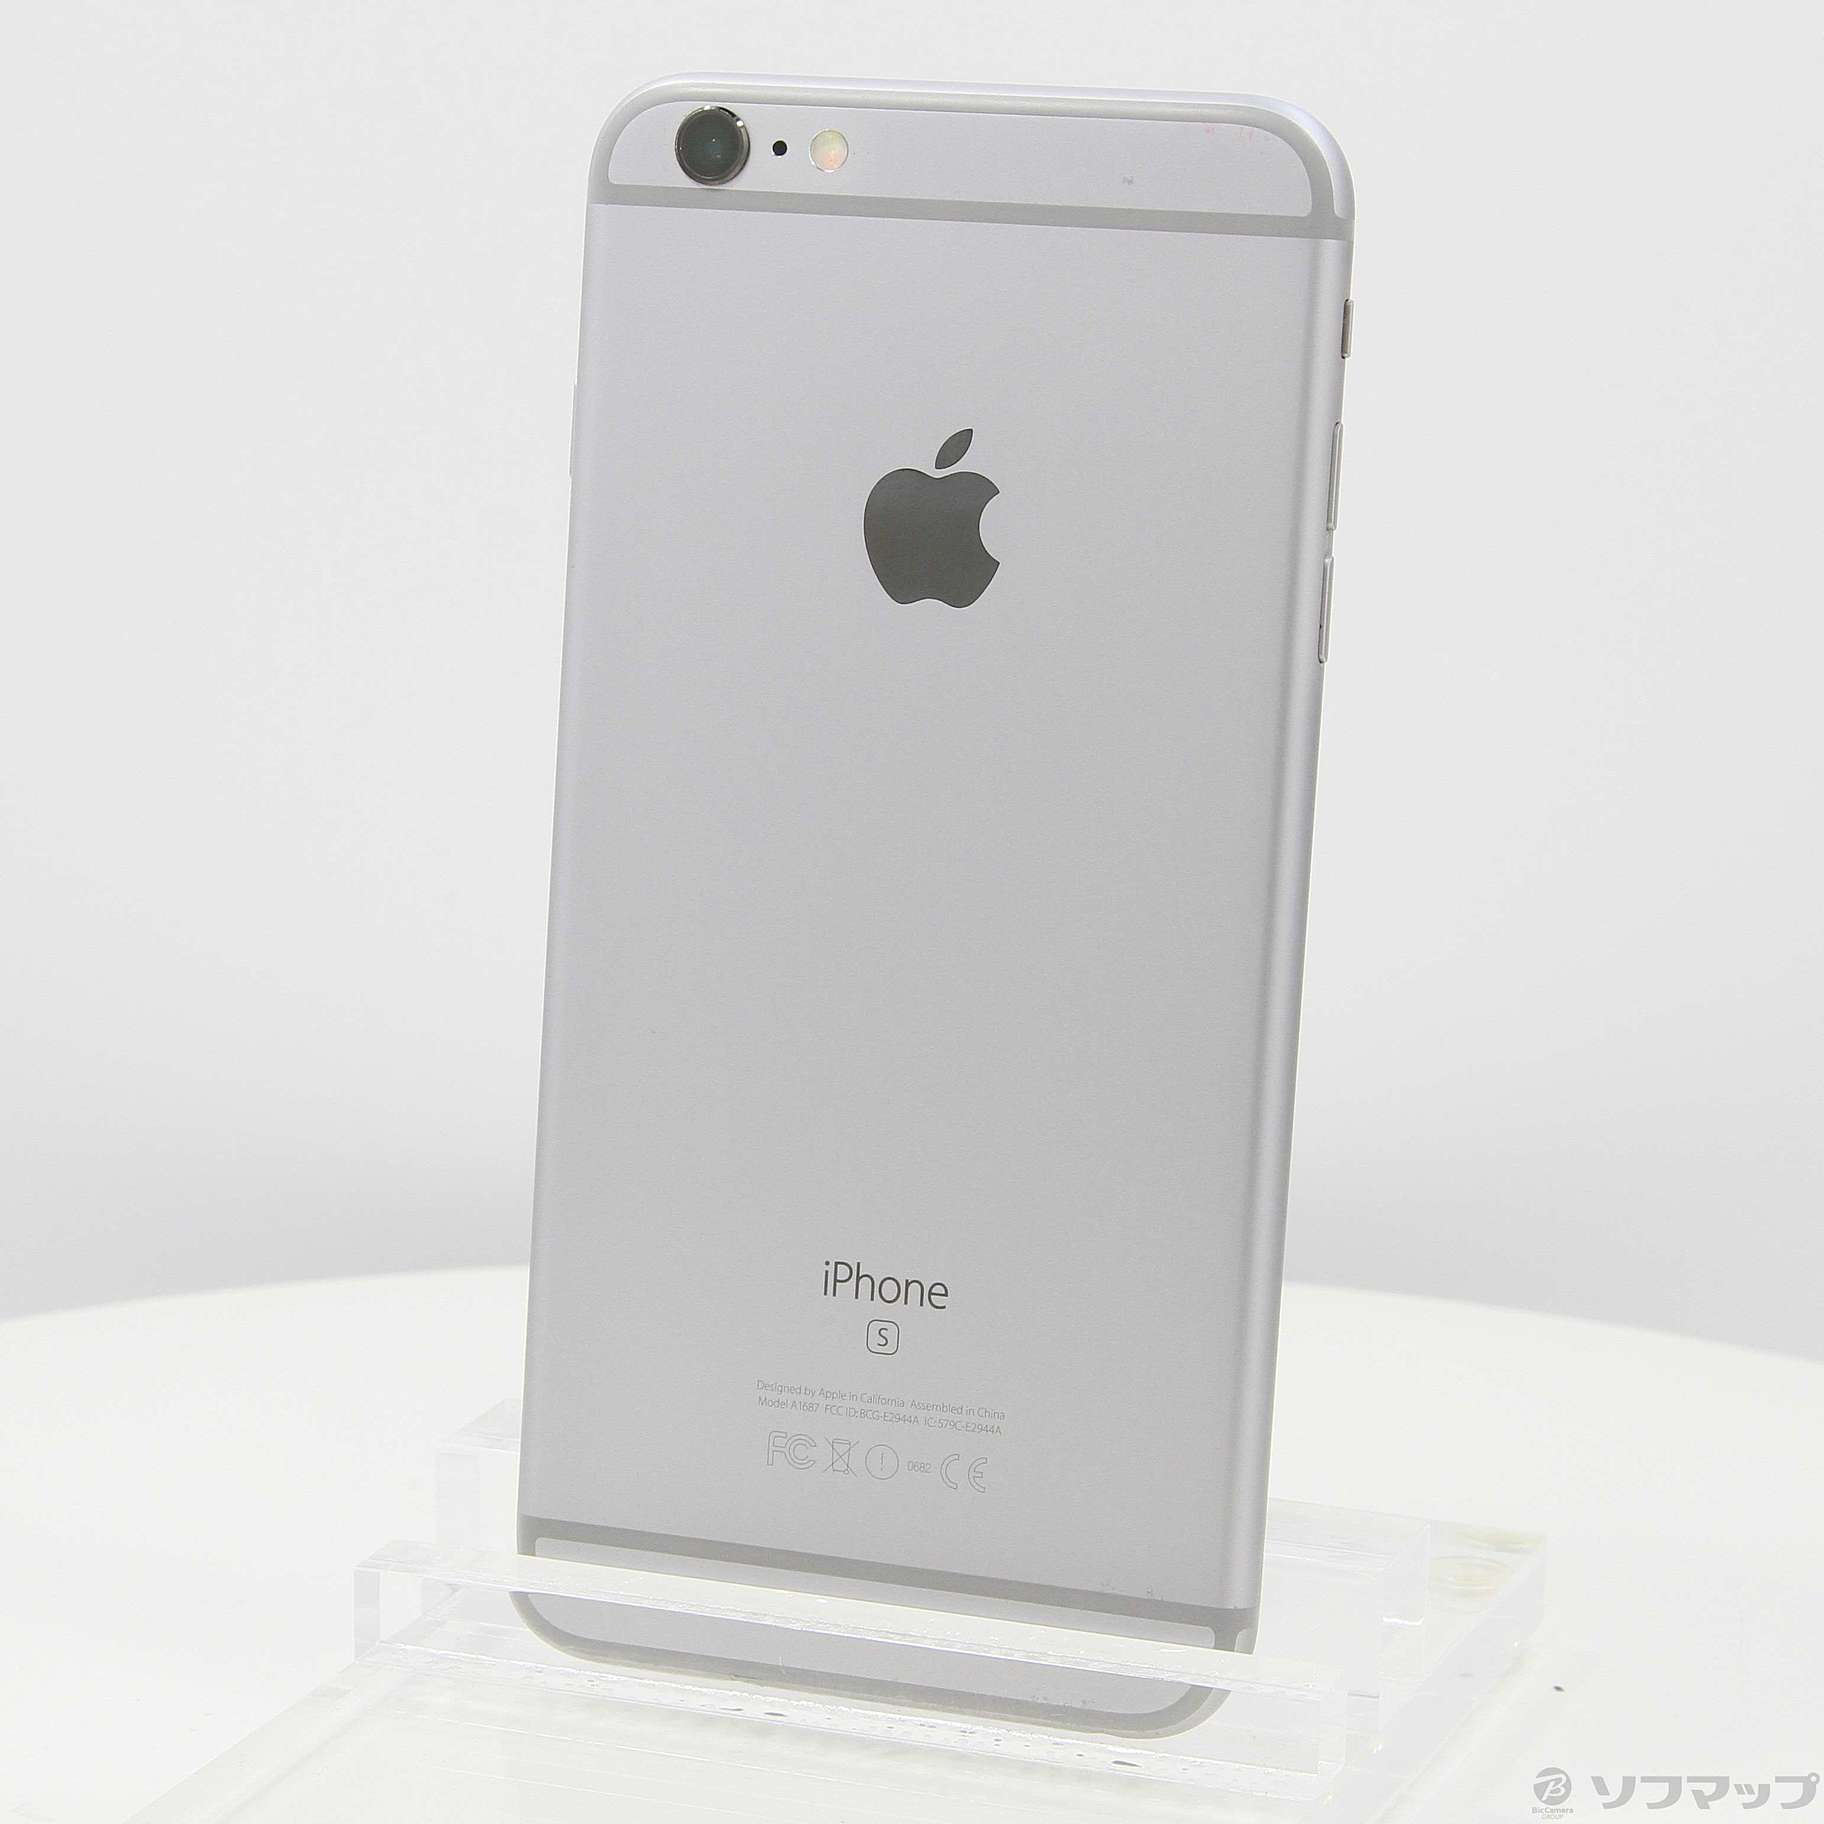 iPhone 6S 空箱と Apple Store 袋 - その他